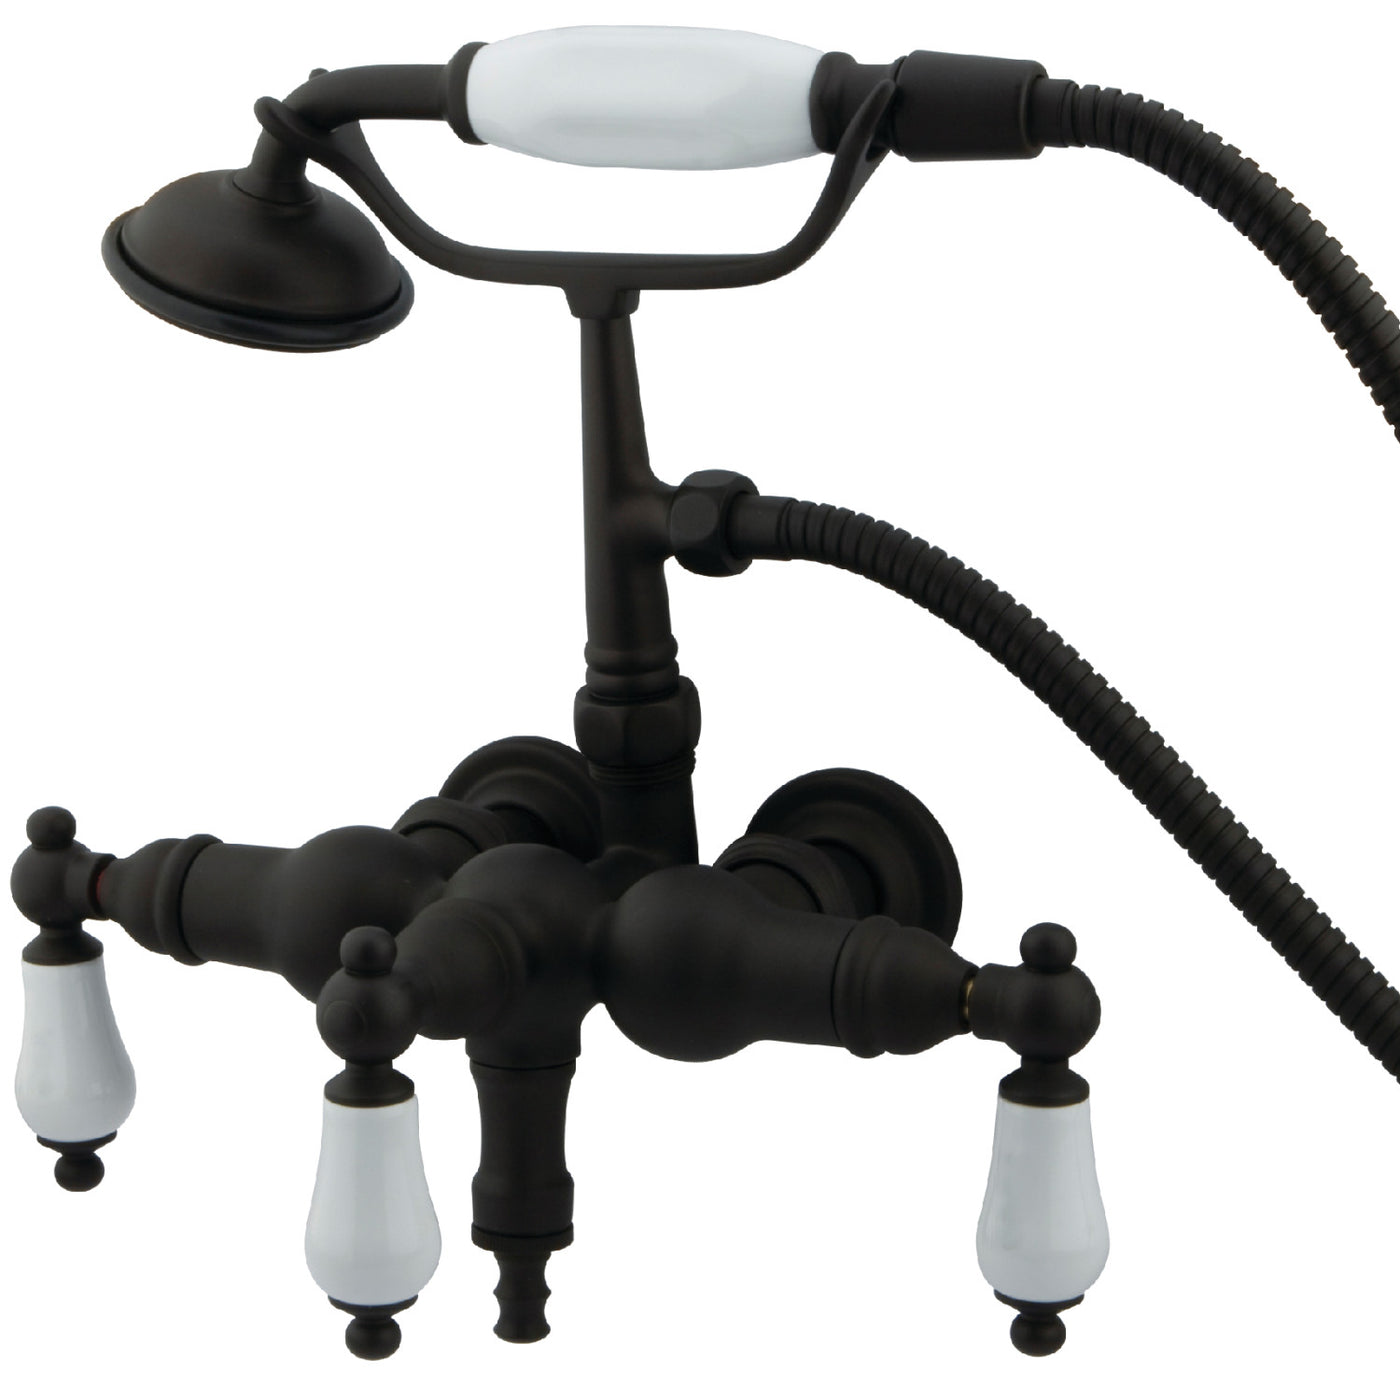 Elements of Design DT0195PL 3-3/8-Inch Wall Mount Tub Faucet with Hand Shower, Oil Rubbed Bronze